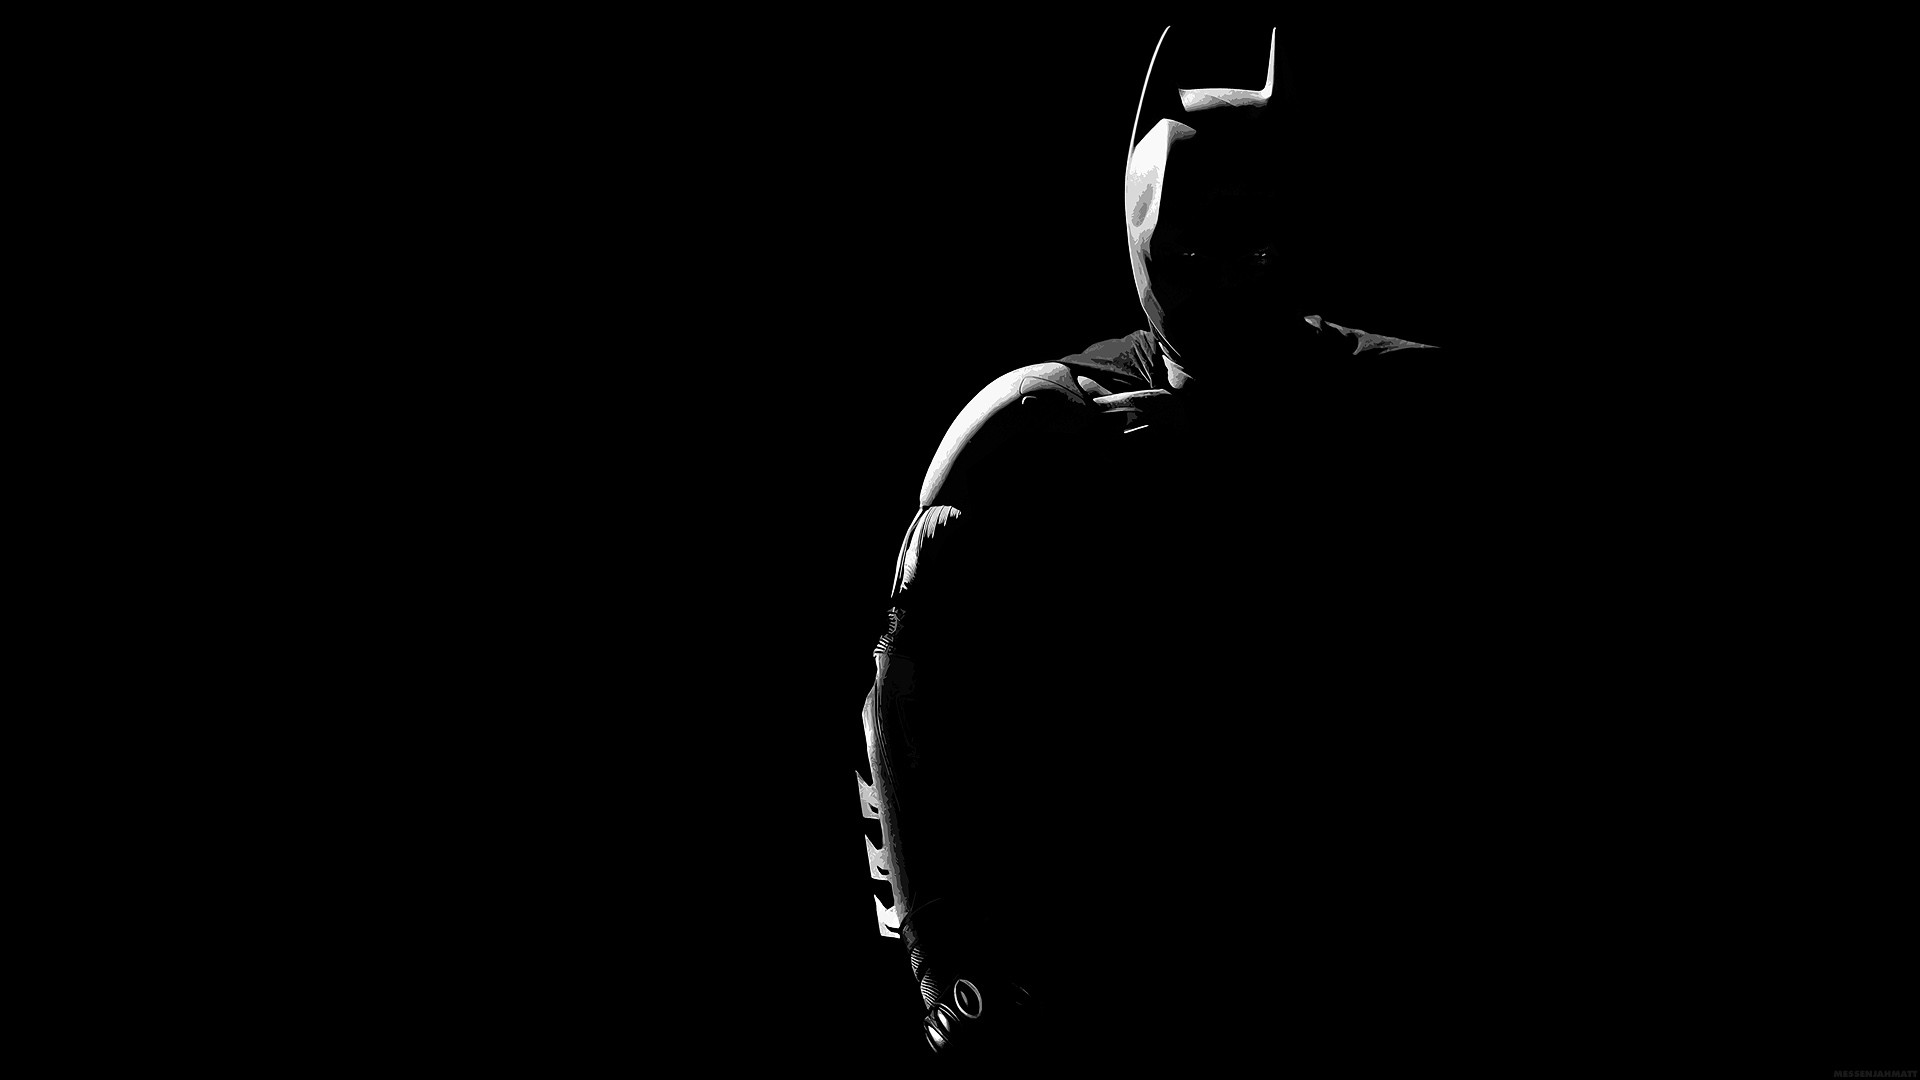 1920x1080 428 The Dark Knight HD Wallpapers | Backgrounds - Wallpaper Abyss - Page 12